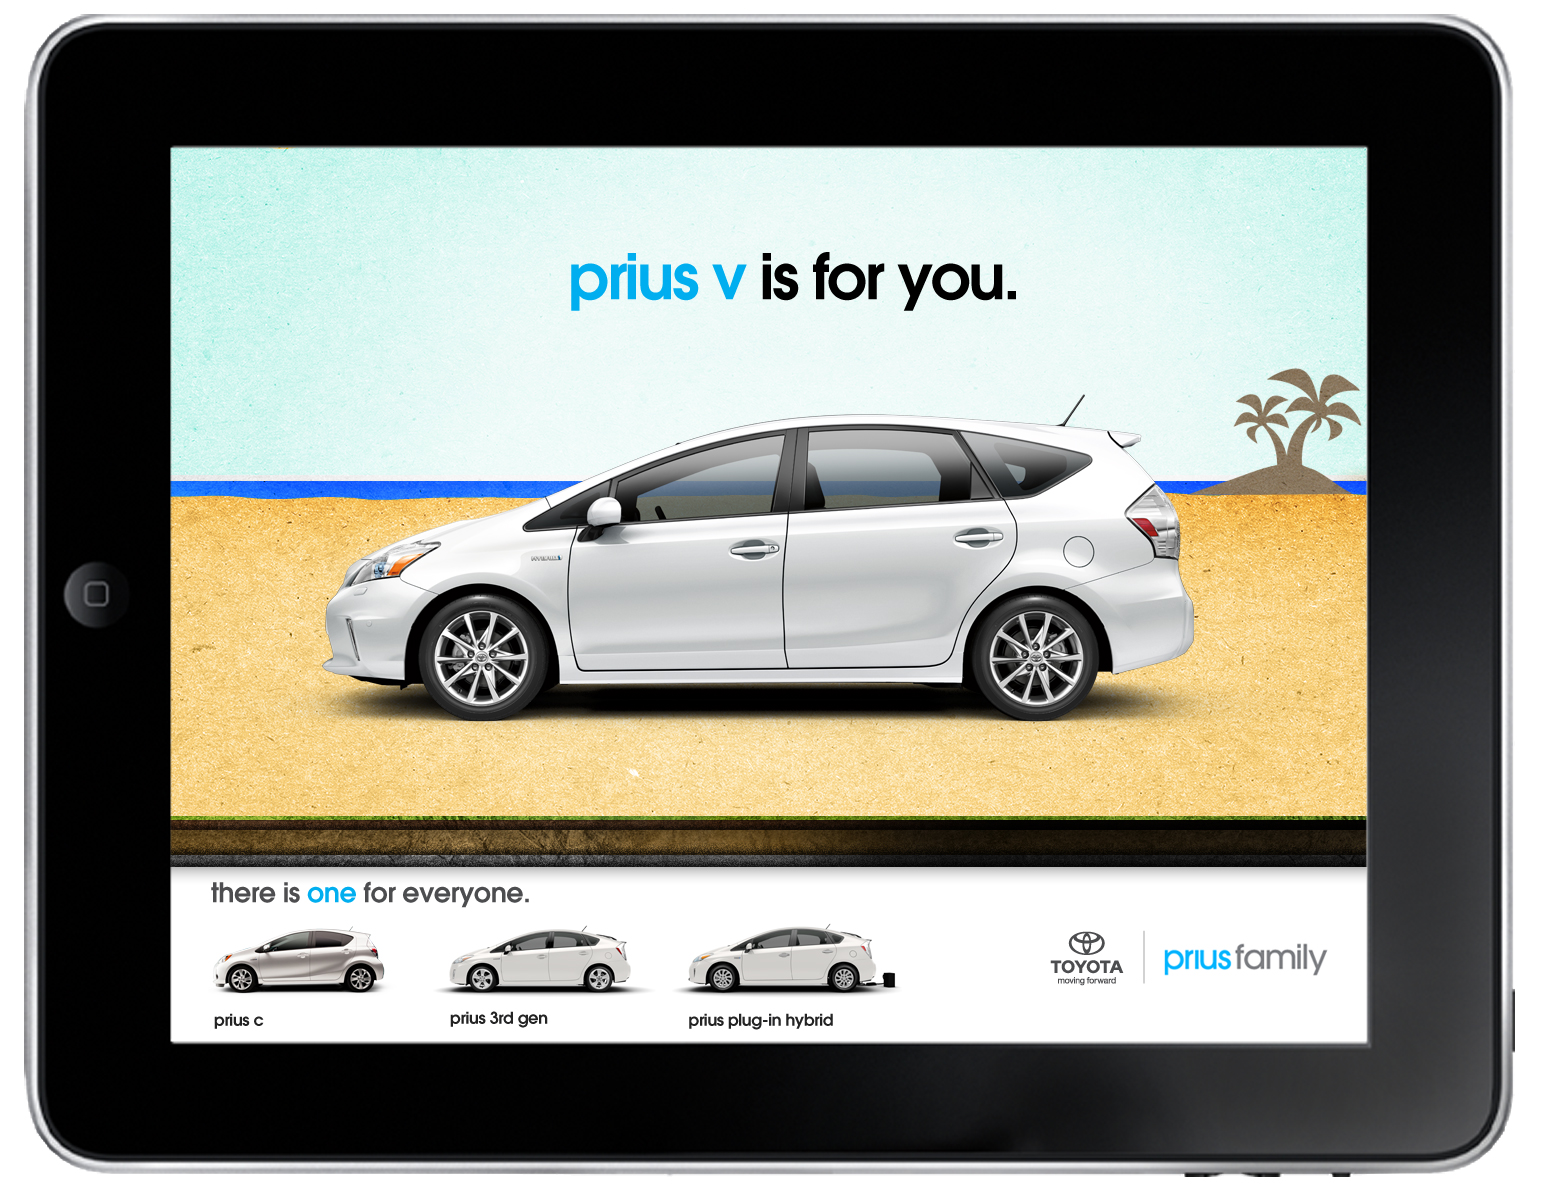 Prius V is for you